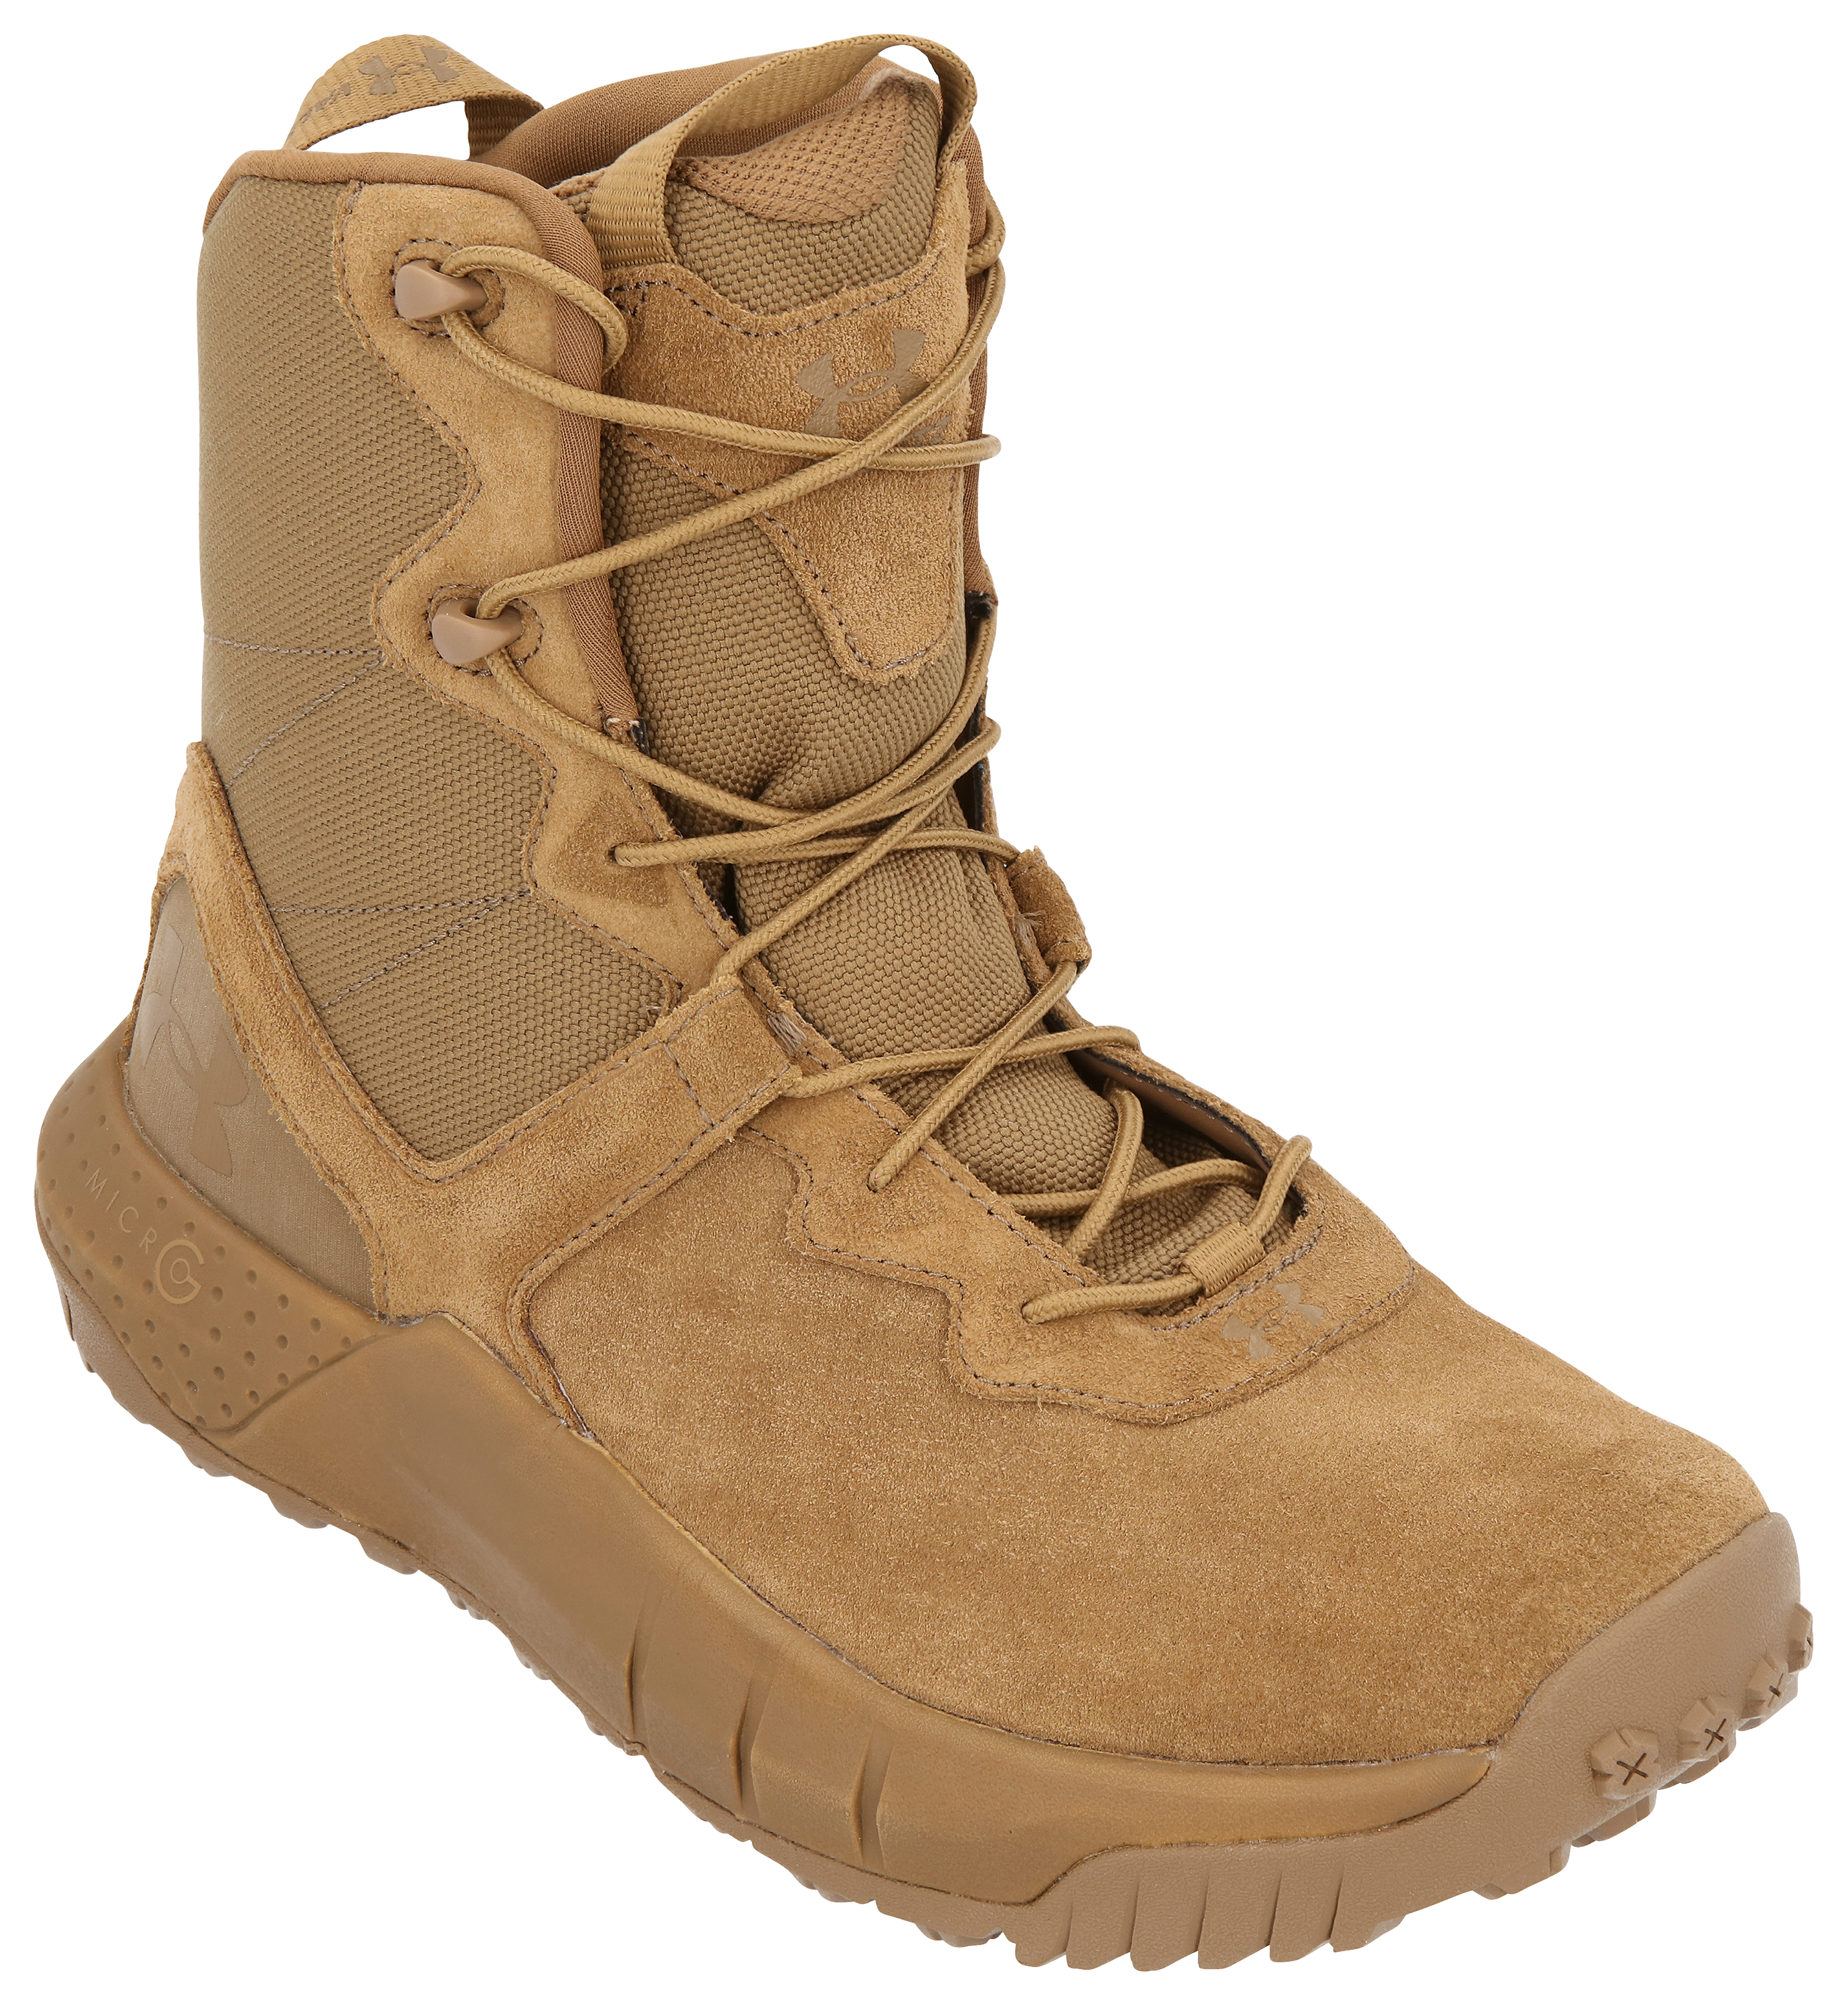 Under Armour Micro G Valsetz AR 670-1 Tactical Boots for Men - Coyote - 8 5M